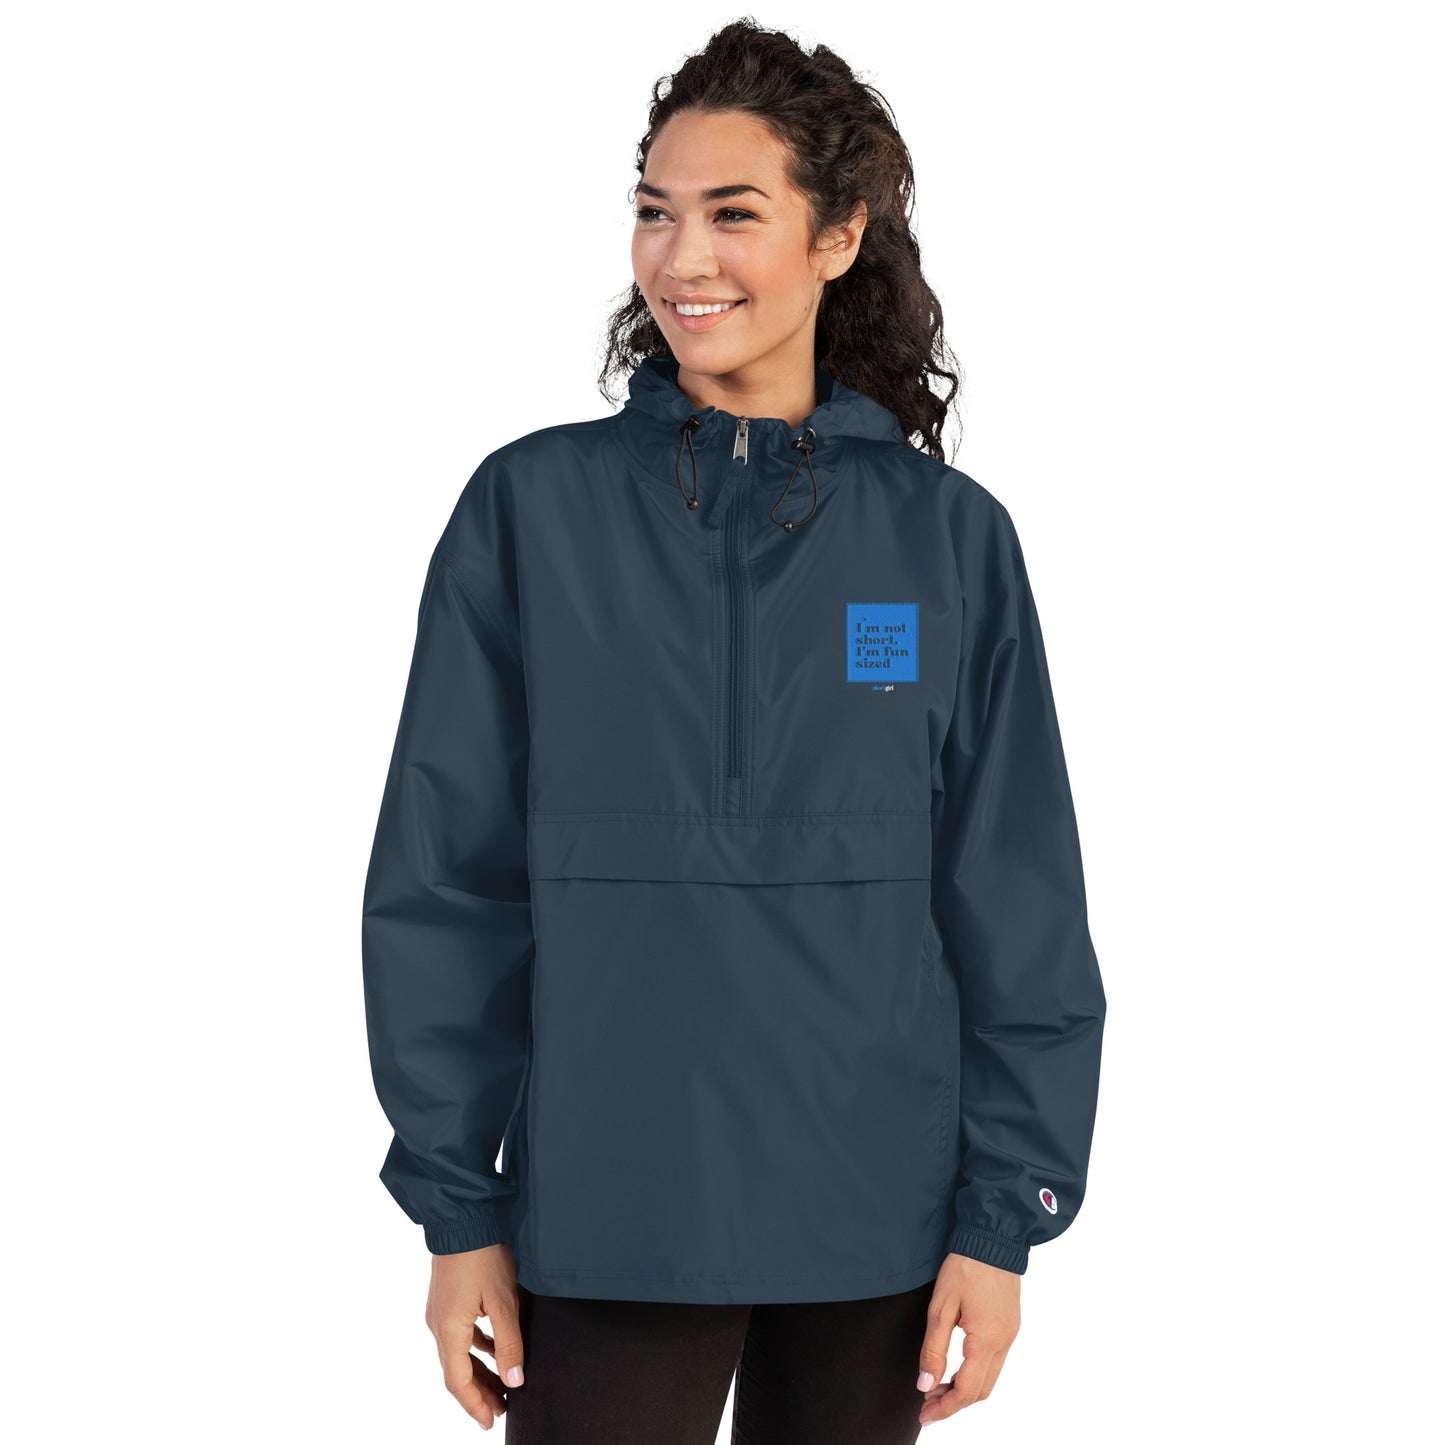 Embroidered Champion Packable Jacket - I'm not short, I'm fun sized